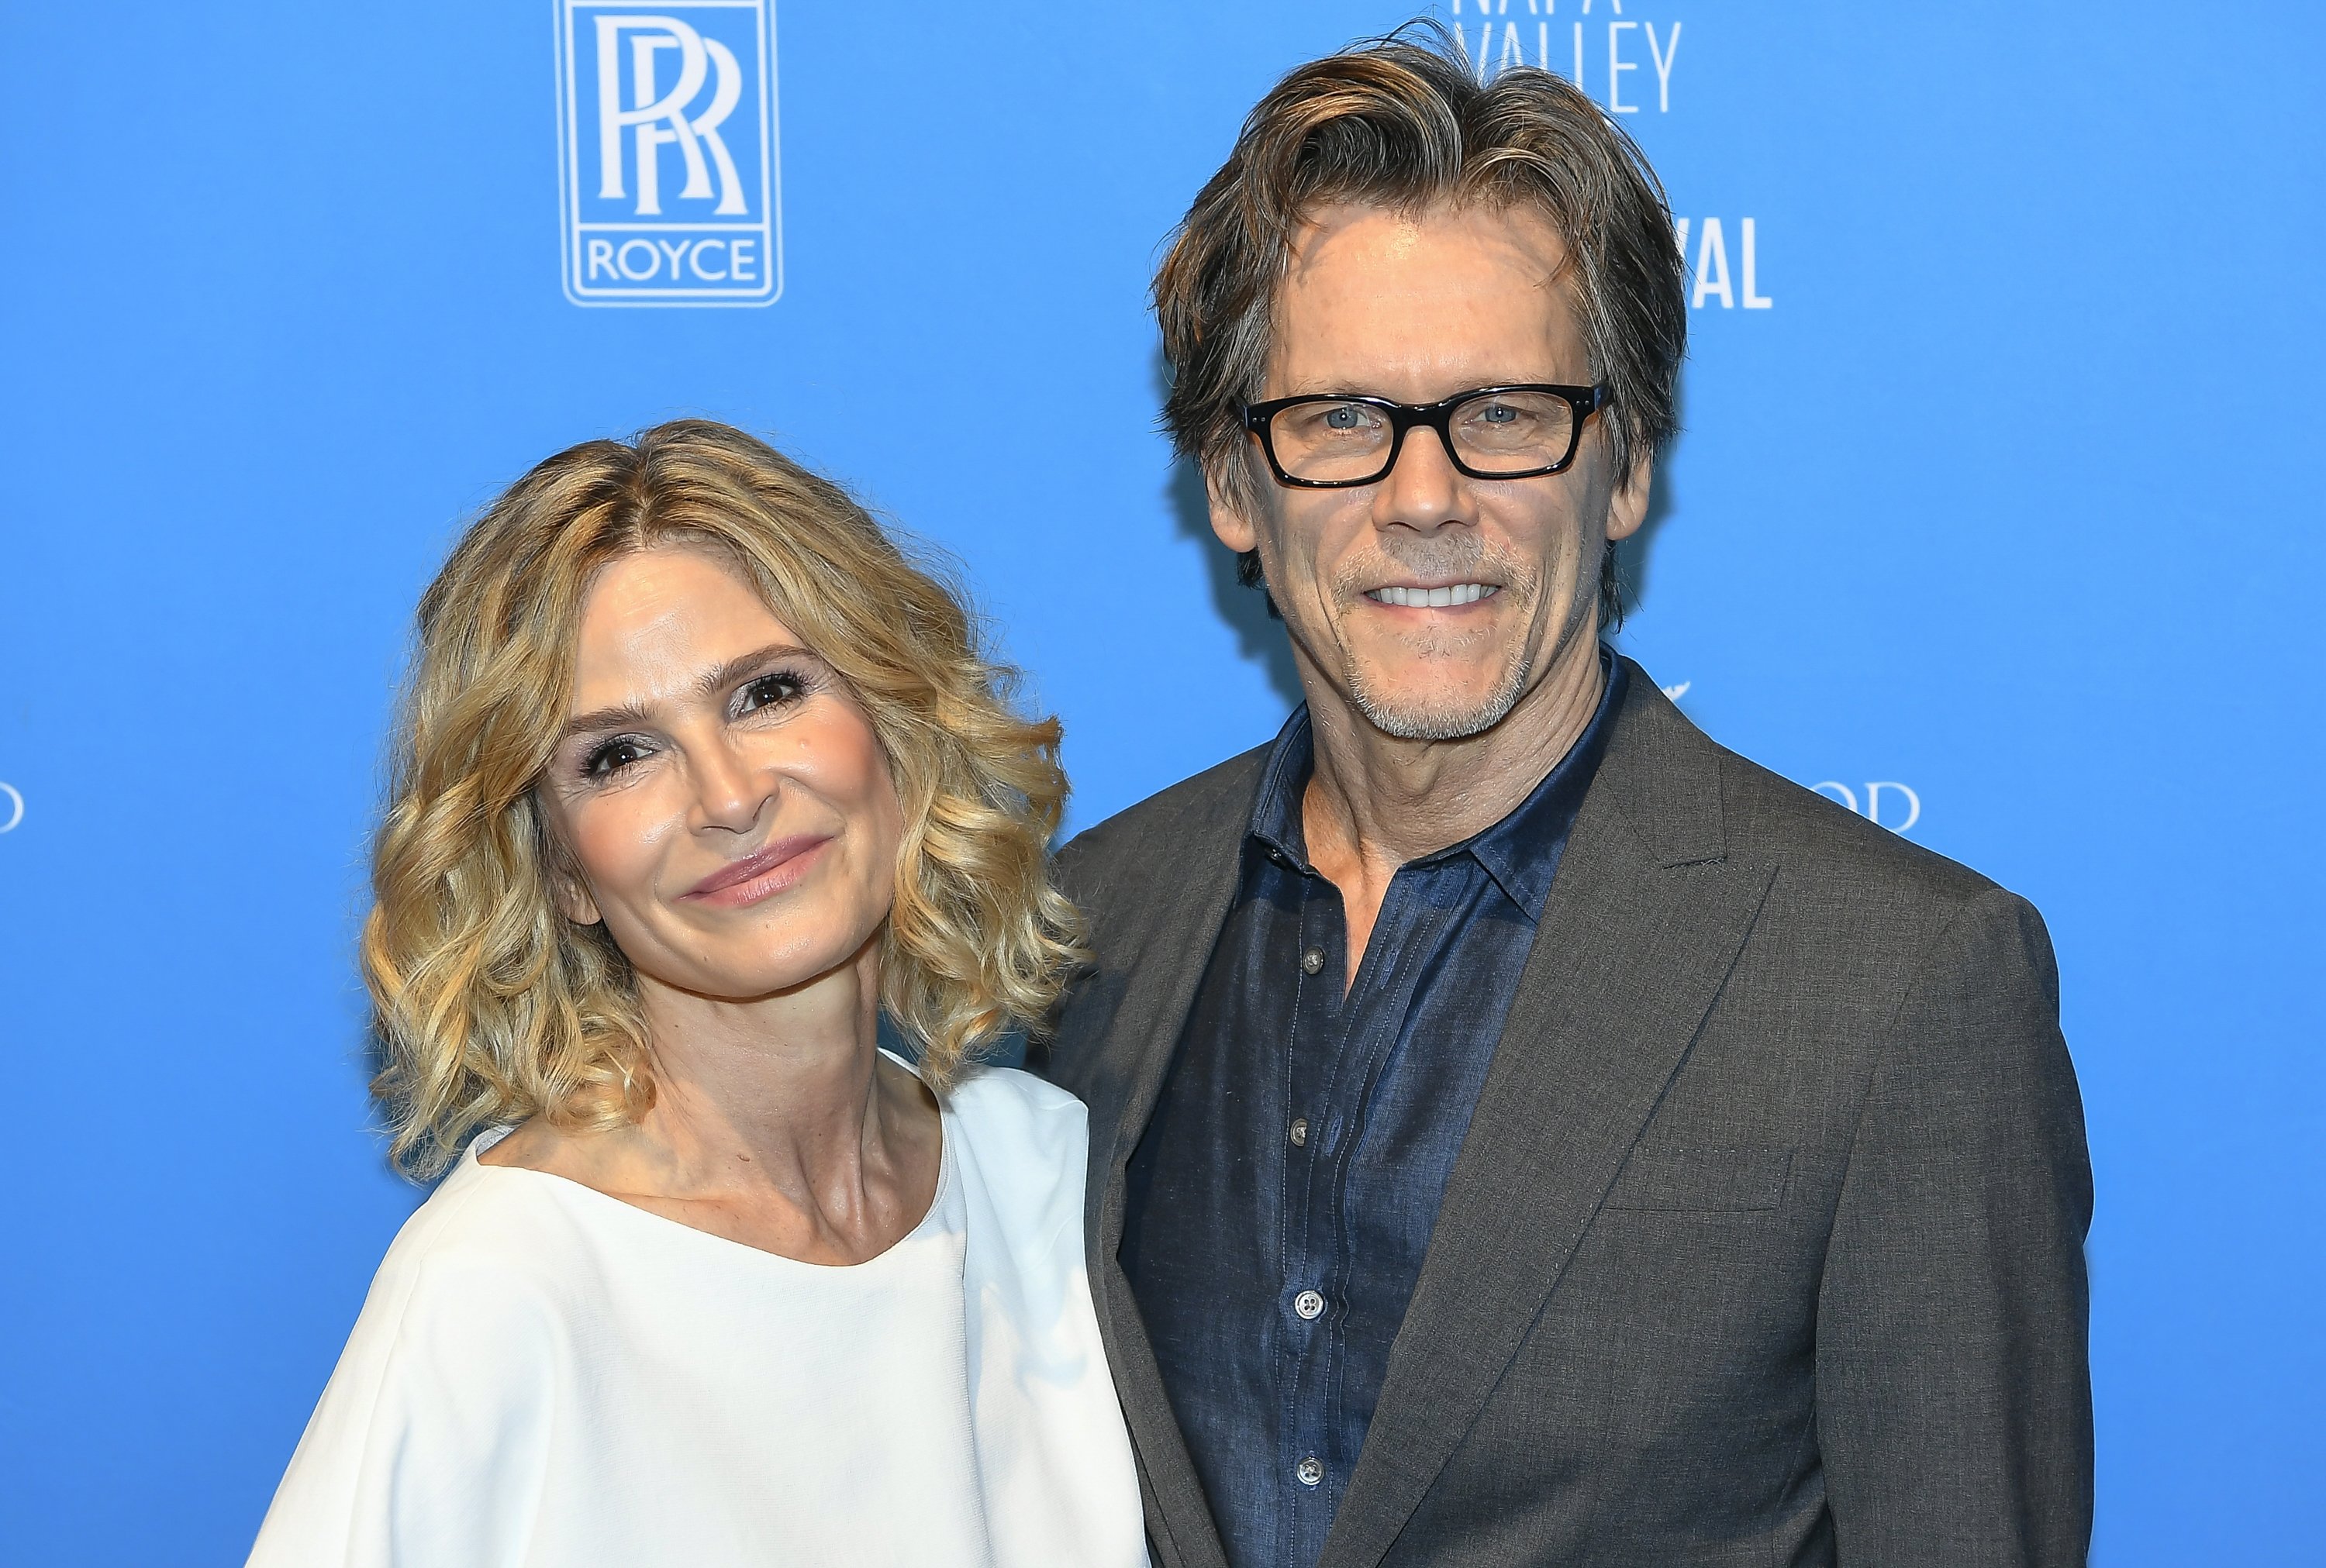 Kyra Sedgewick and her husband, Kevin Bacon at the "Napa Valley Film Festival" in Napa, November, 2013. | Photo: Getty Images.